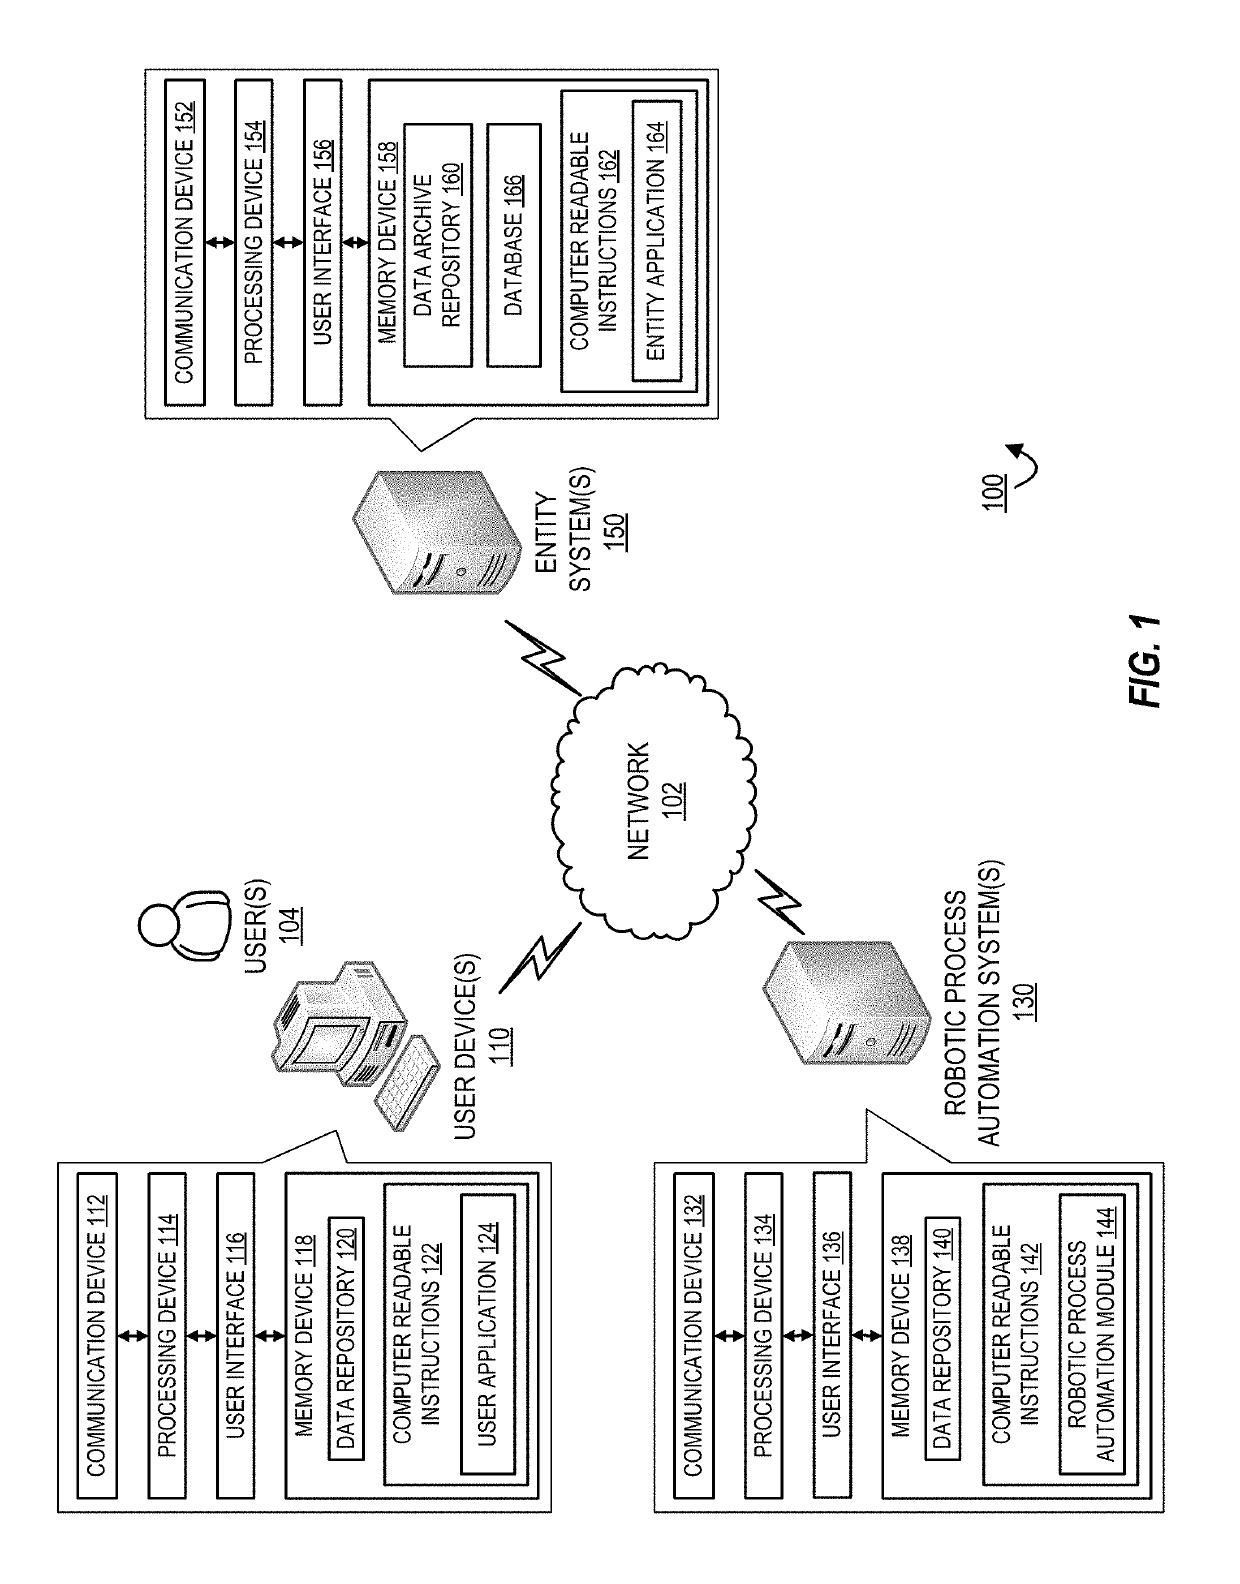 Robotic process automation enabled file dissection for error diagnosis and correction